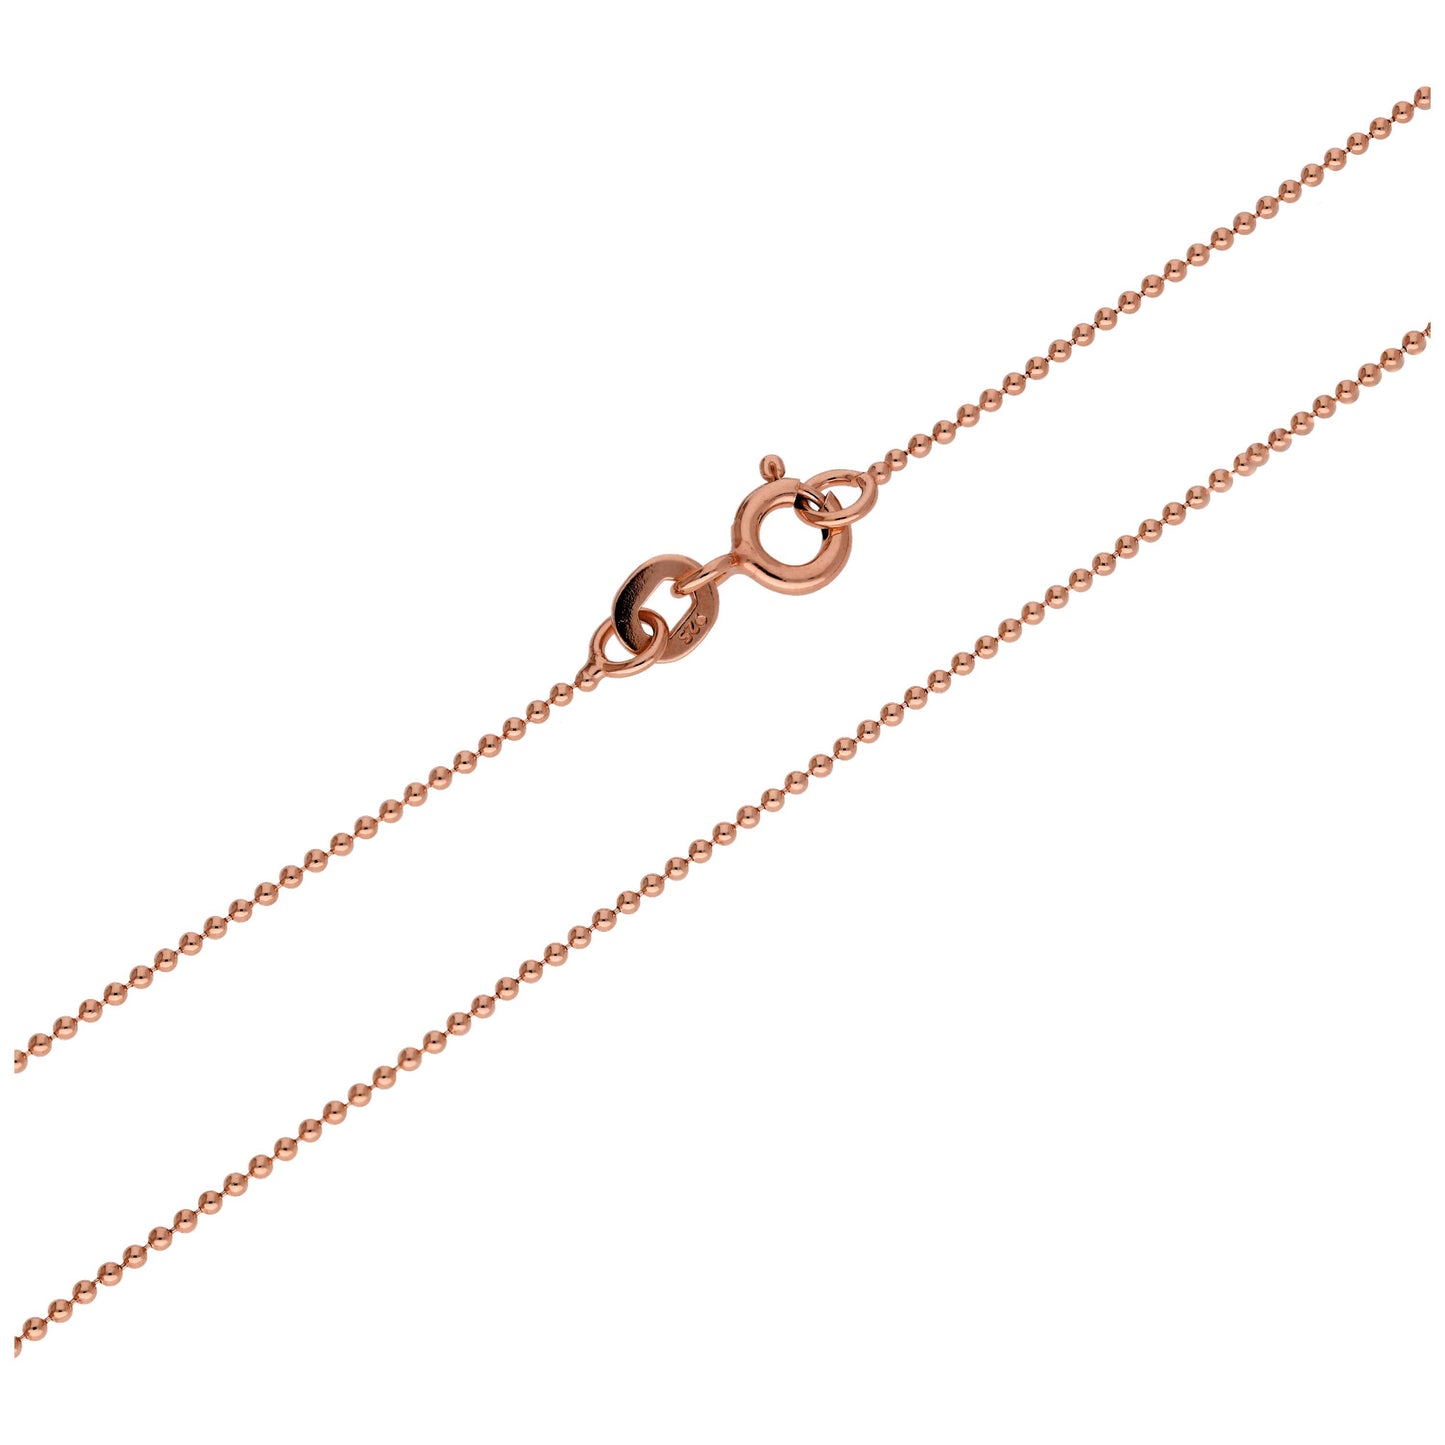 Rose Gold Plated Sterling Silver 1mm Bead Chain 18 Inches